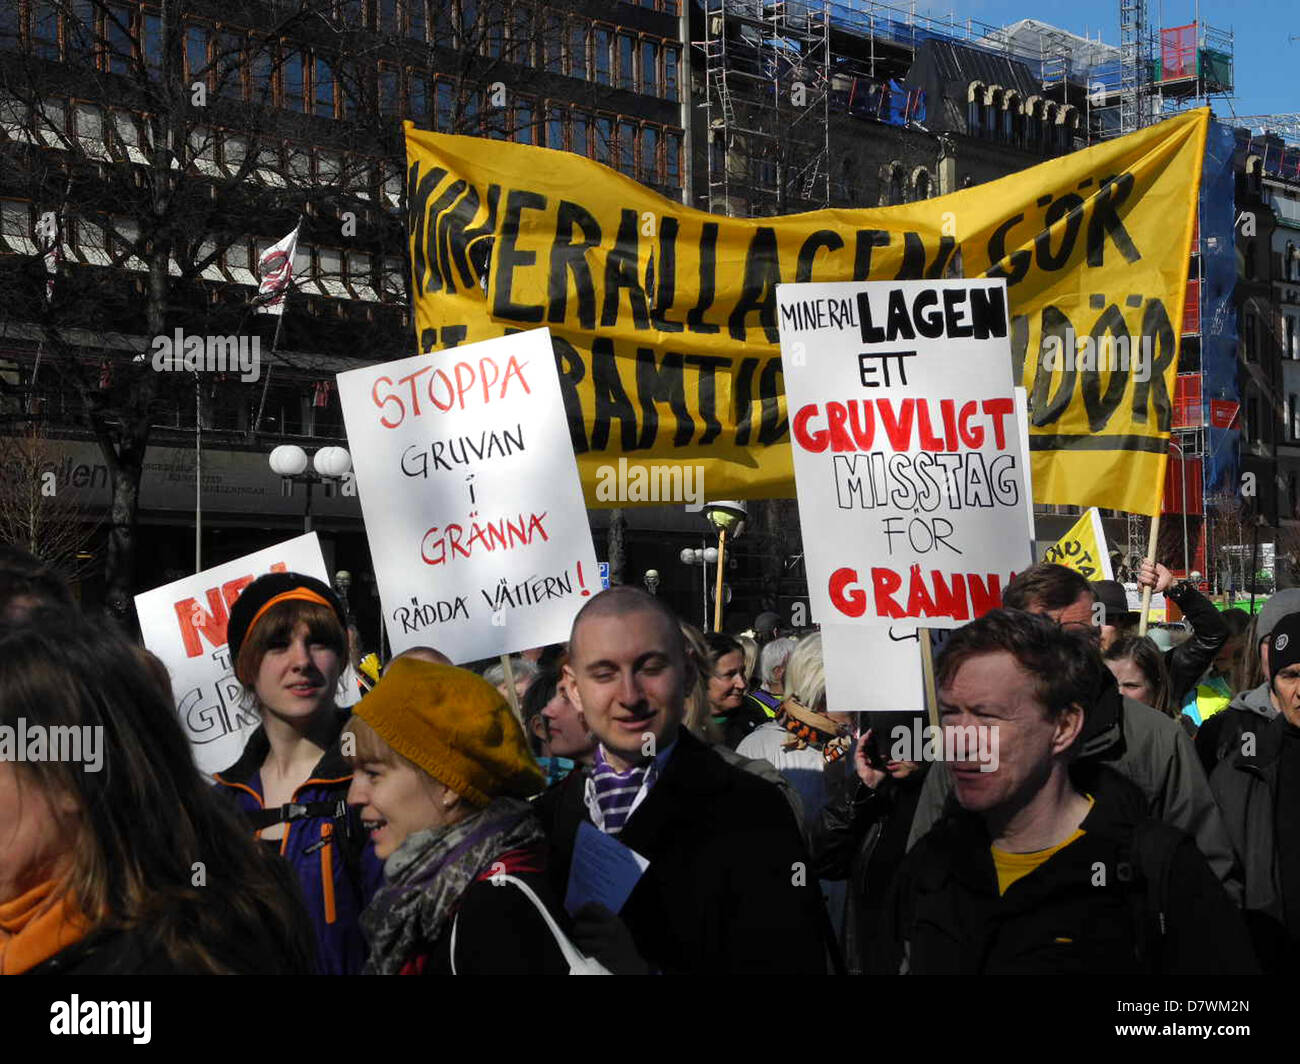 Demonstration against mining and destruction of environment 20 April 2013 in Stockholm, Sweden. Stock Photo